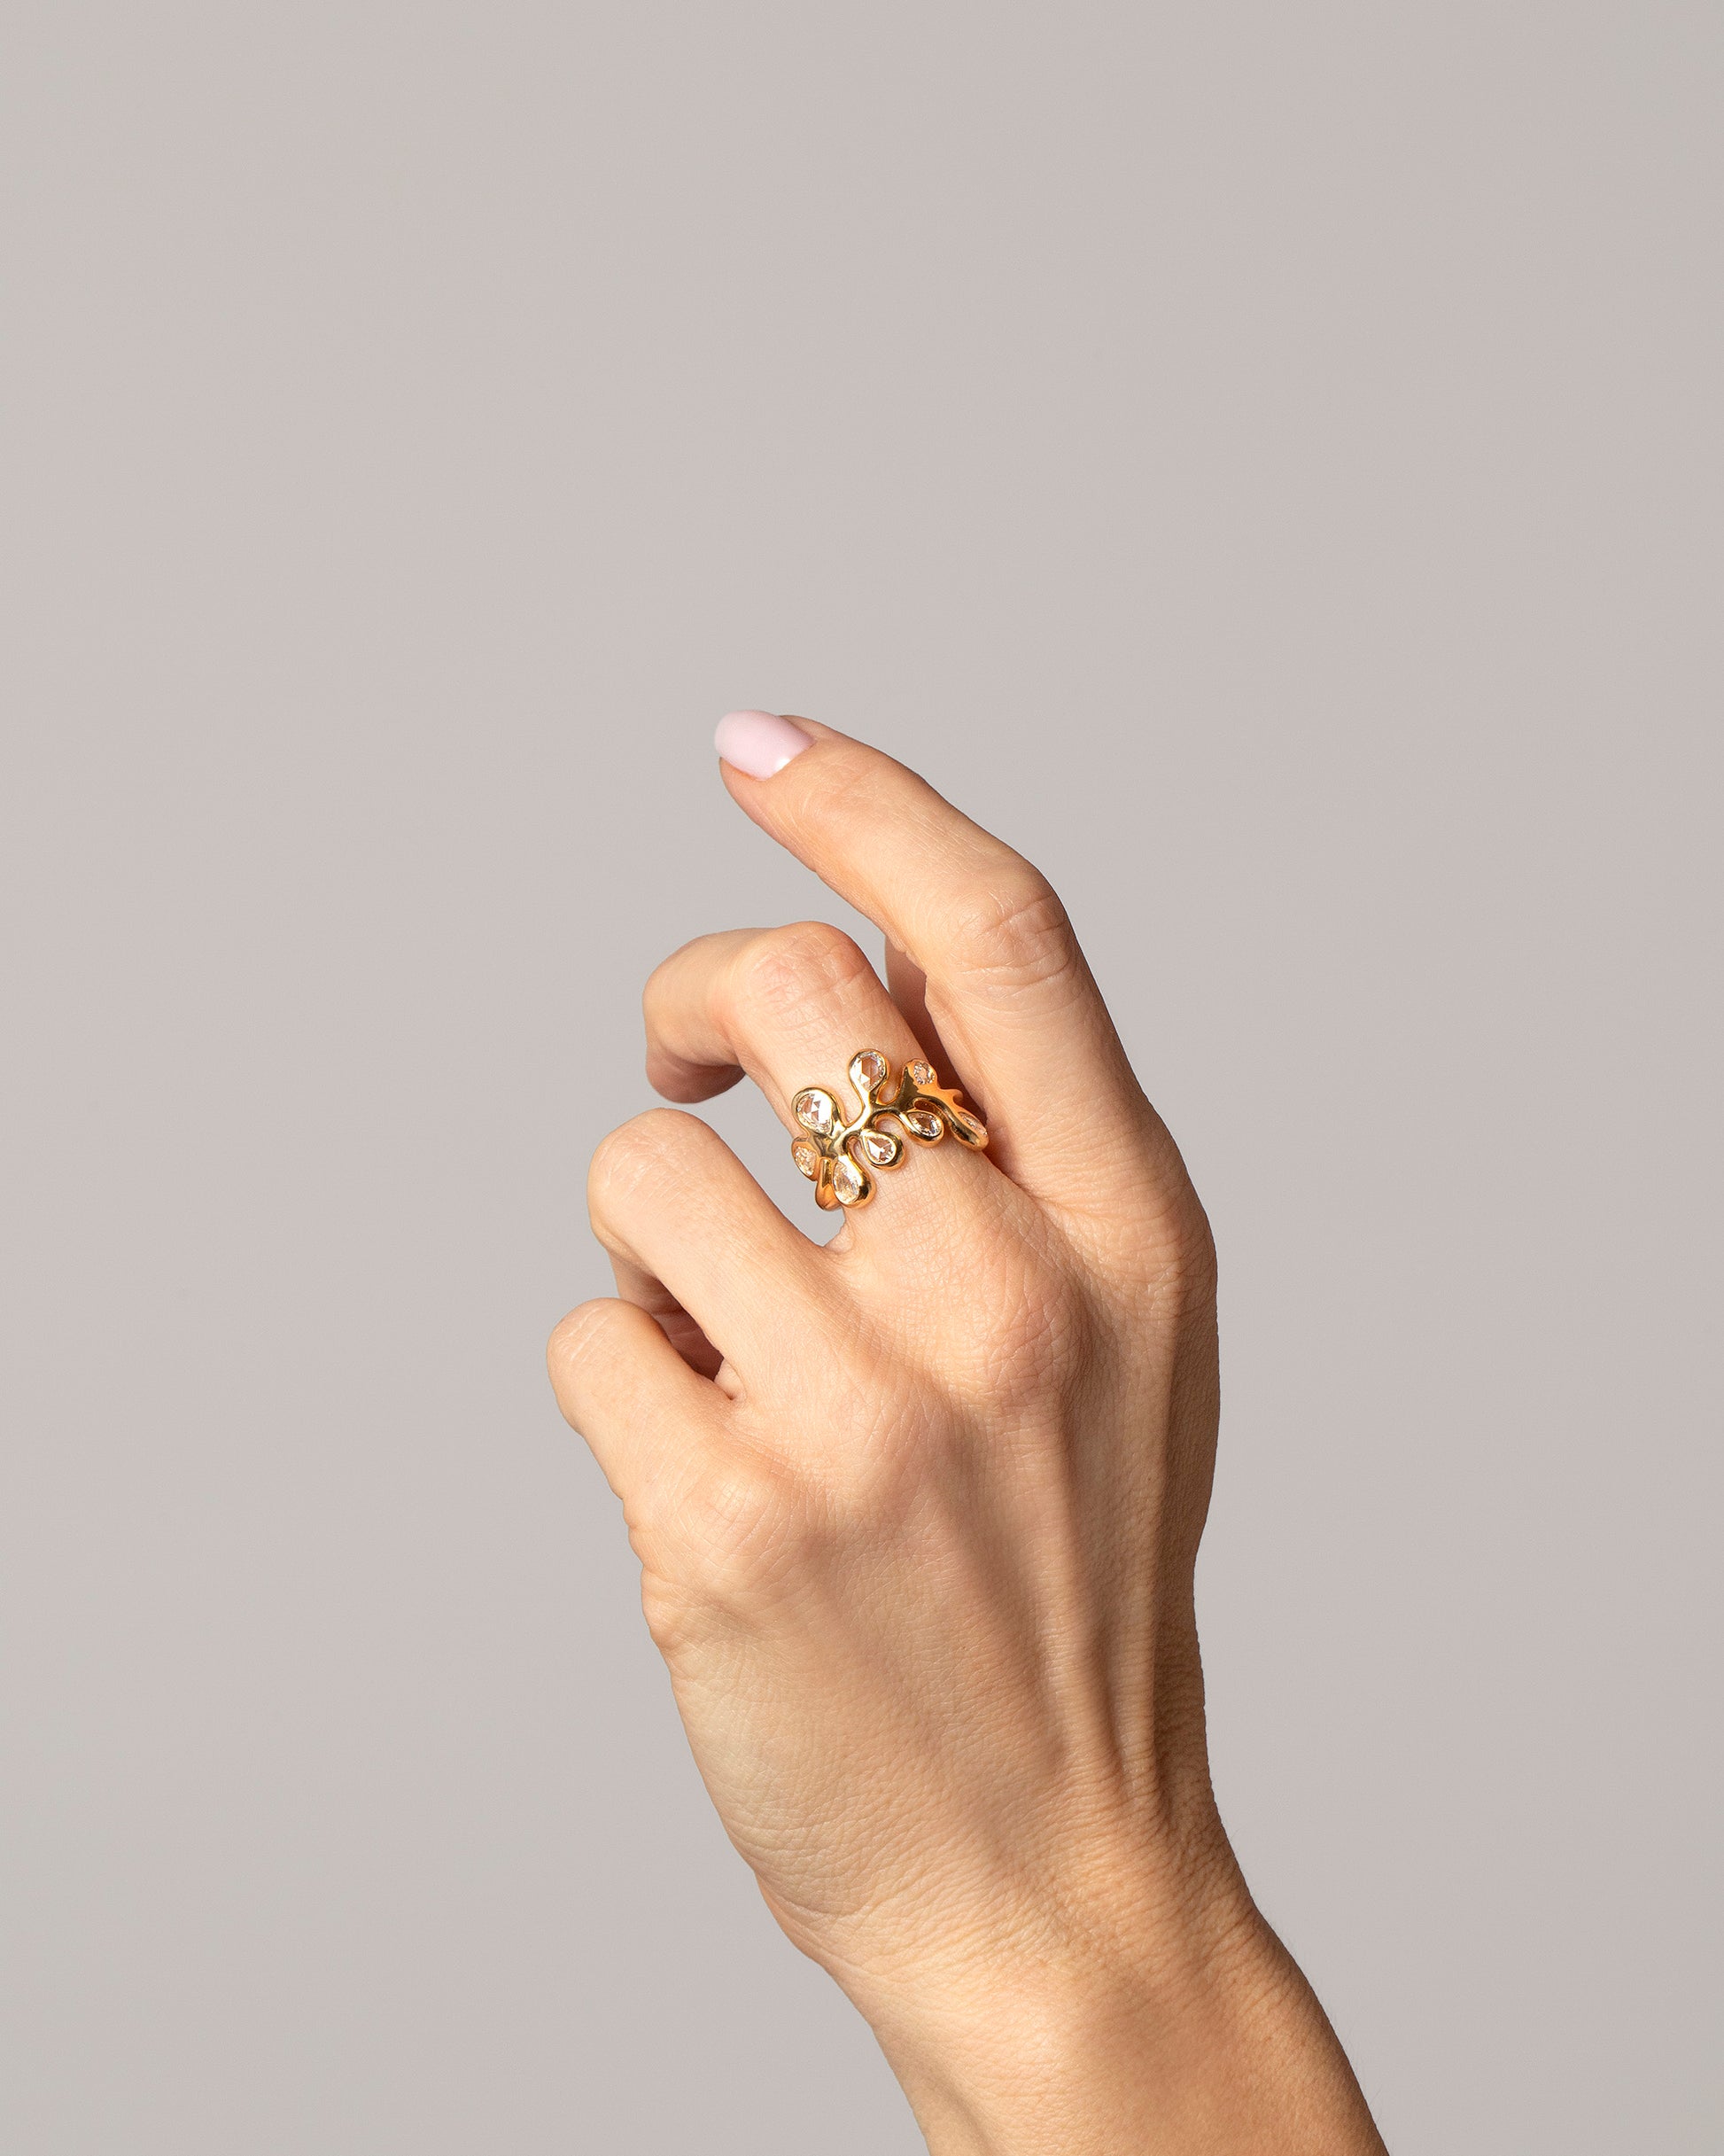 Editorial photo of model wearing the Palm Ring.